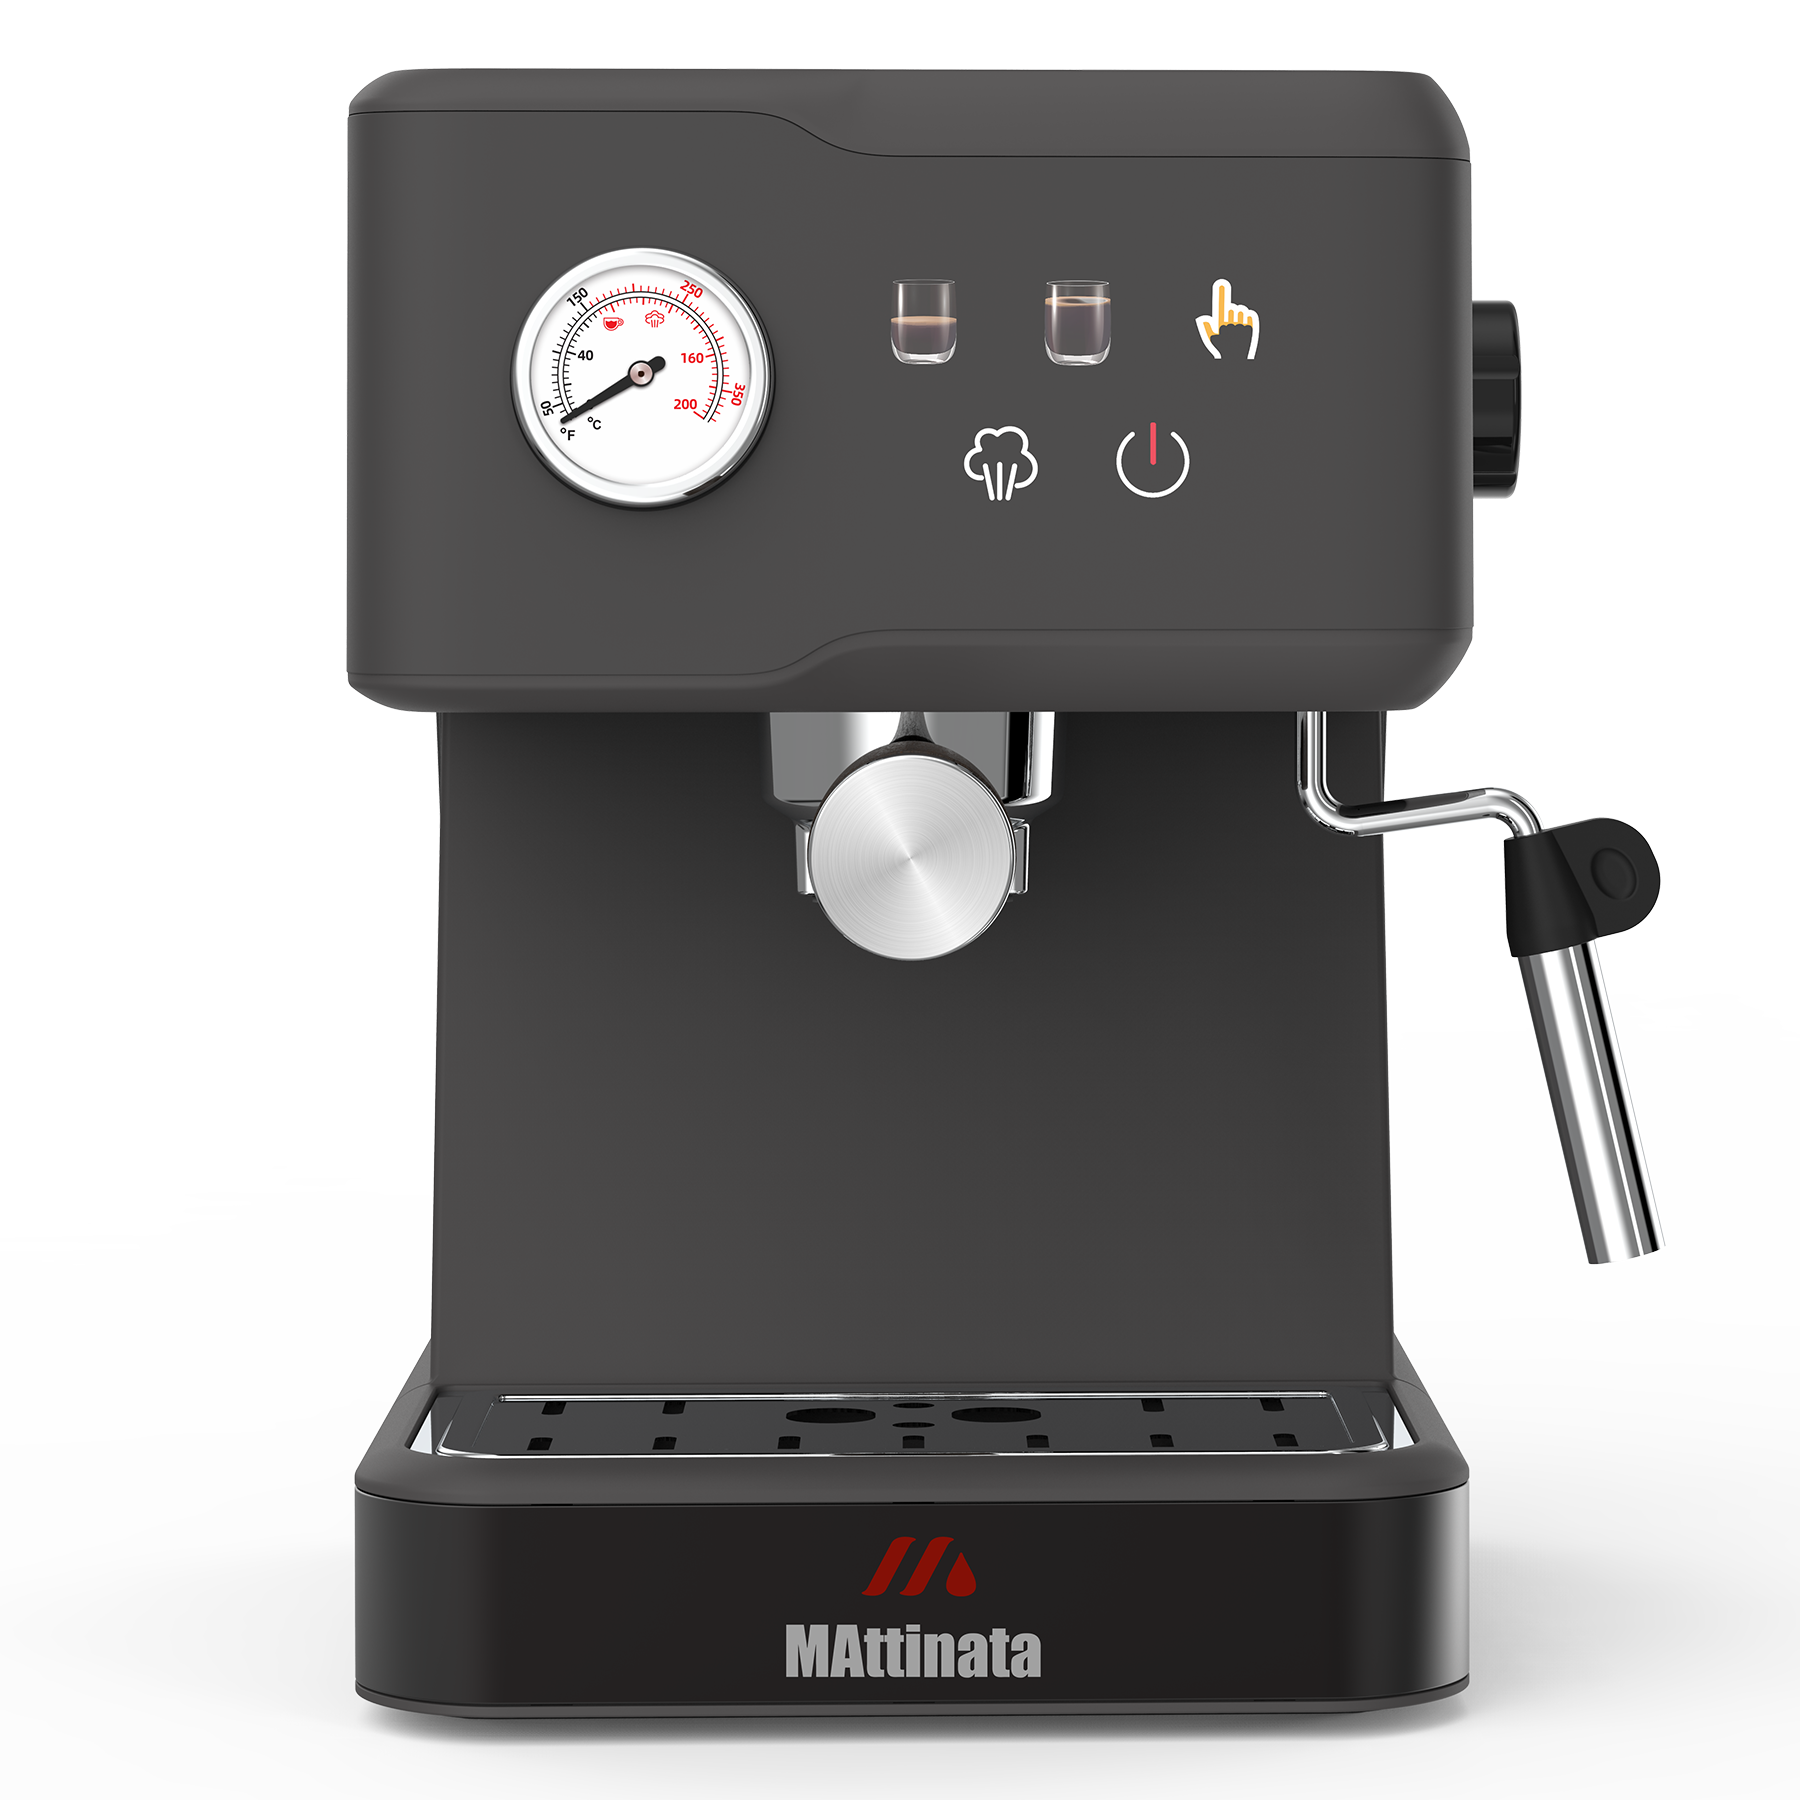 Automatic Espresso Machines: A Must-Have for Coffee Lovers